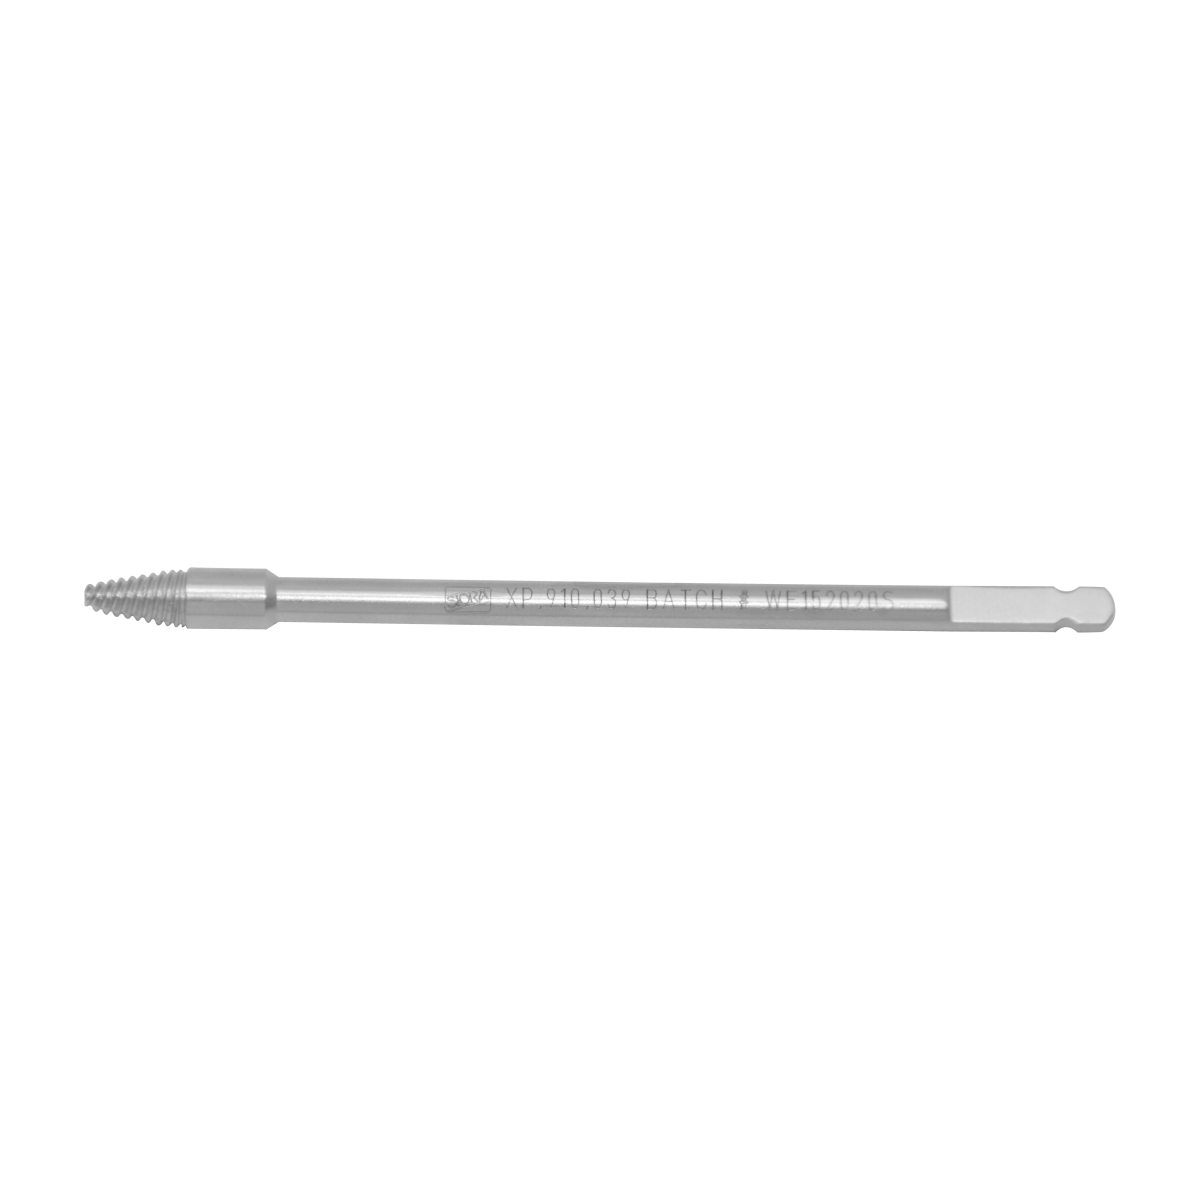 Conical Extraction Screw For 2.7, 3.5 & 4.0mm Screws